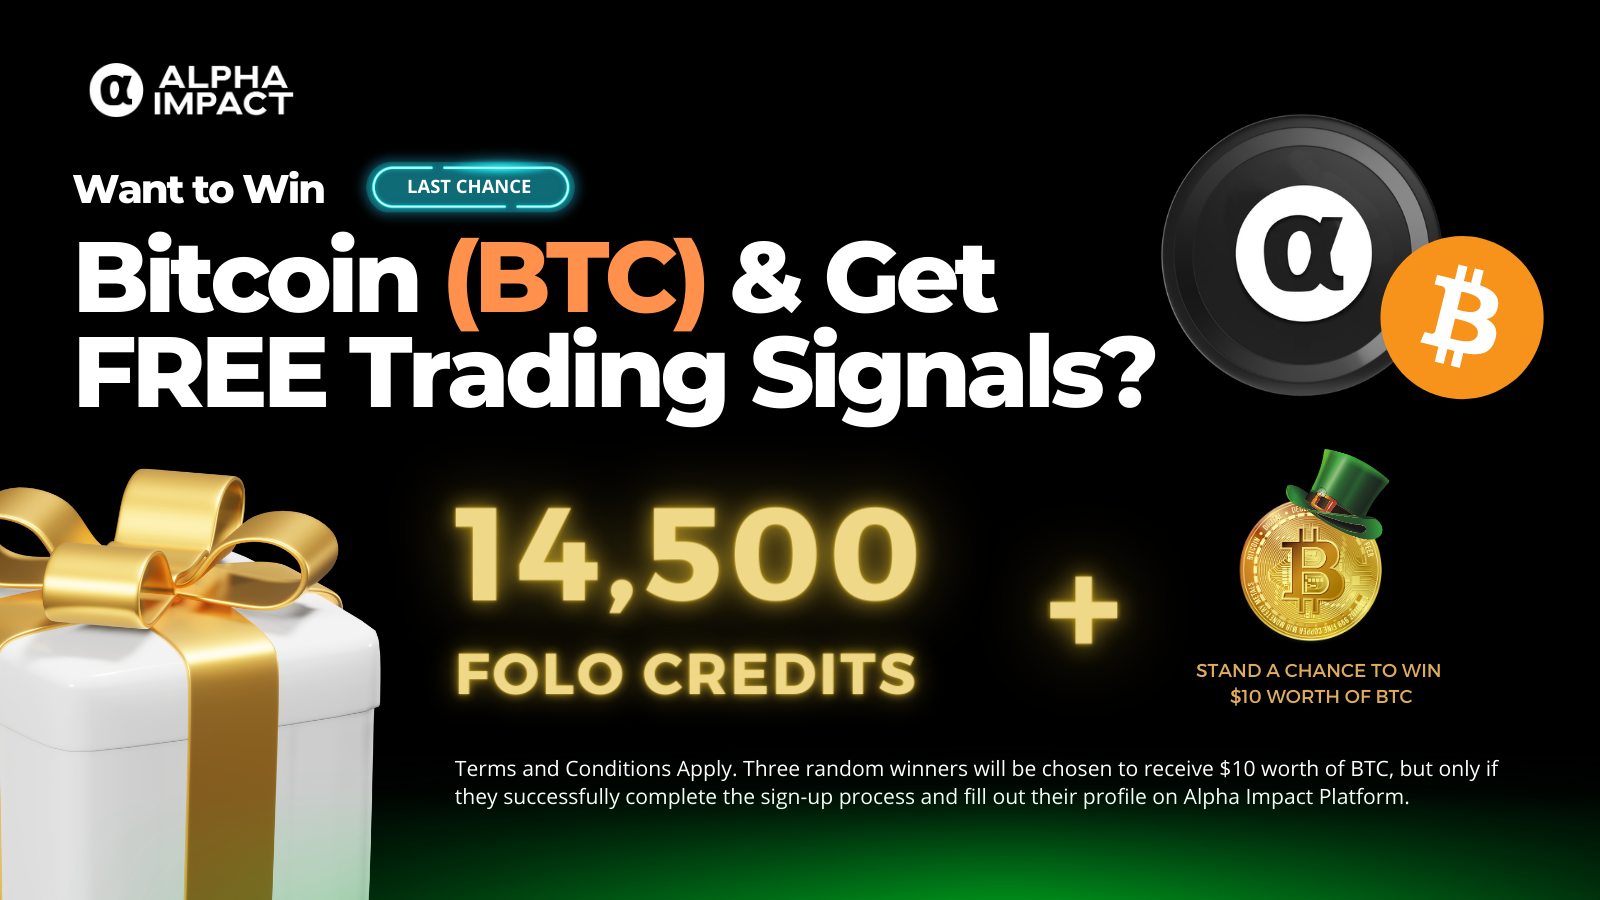 Want to win Bitcoin (BTC) and Get Free Trading Signals on Alpha Impact Platform - image source